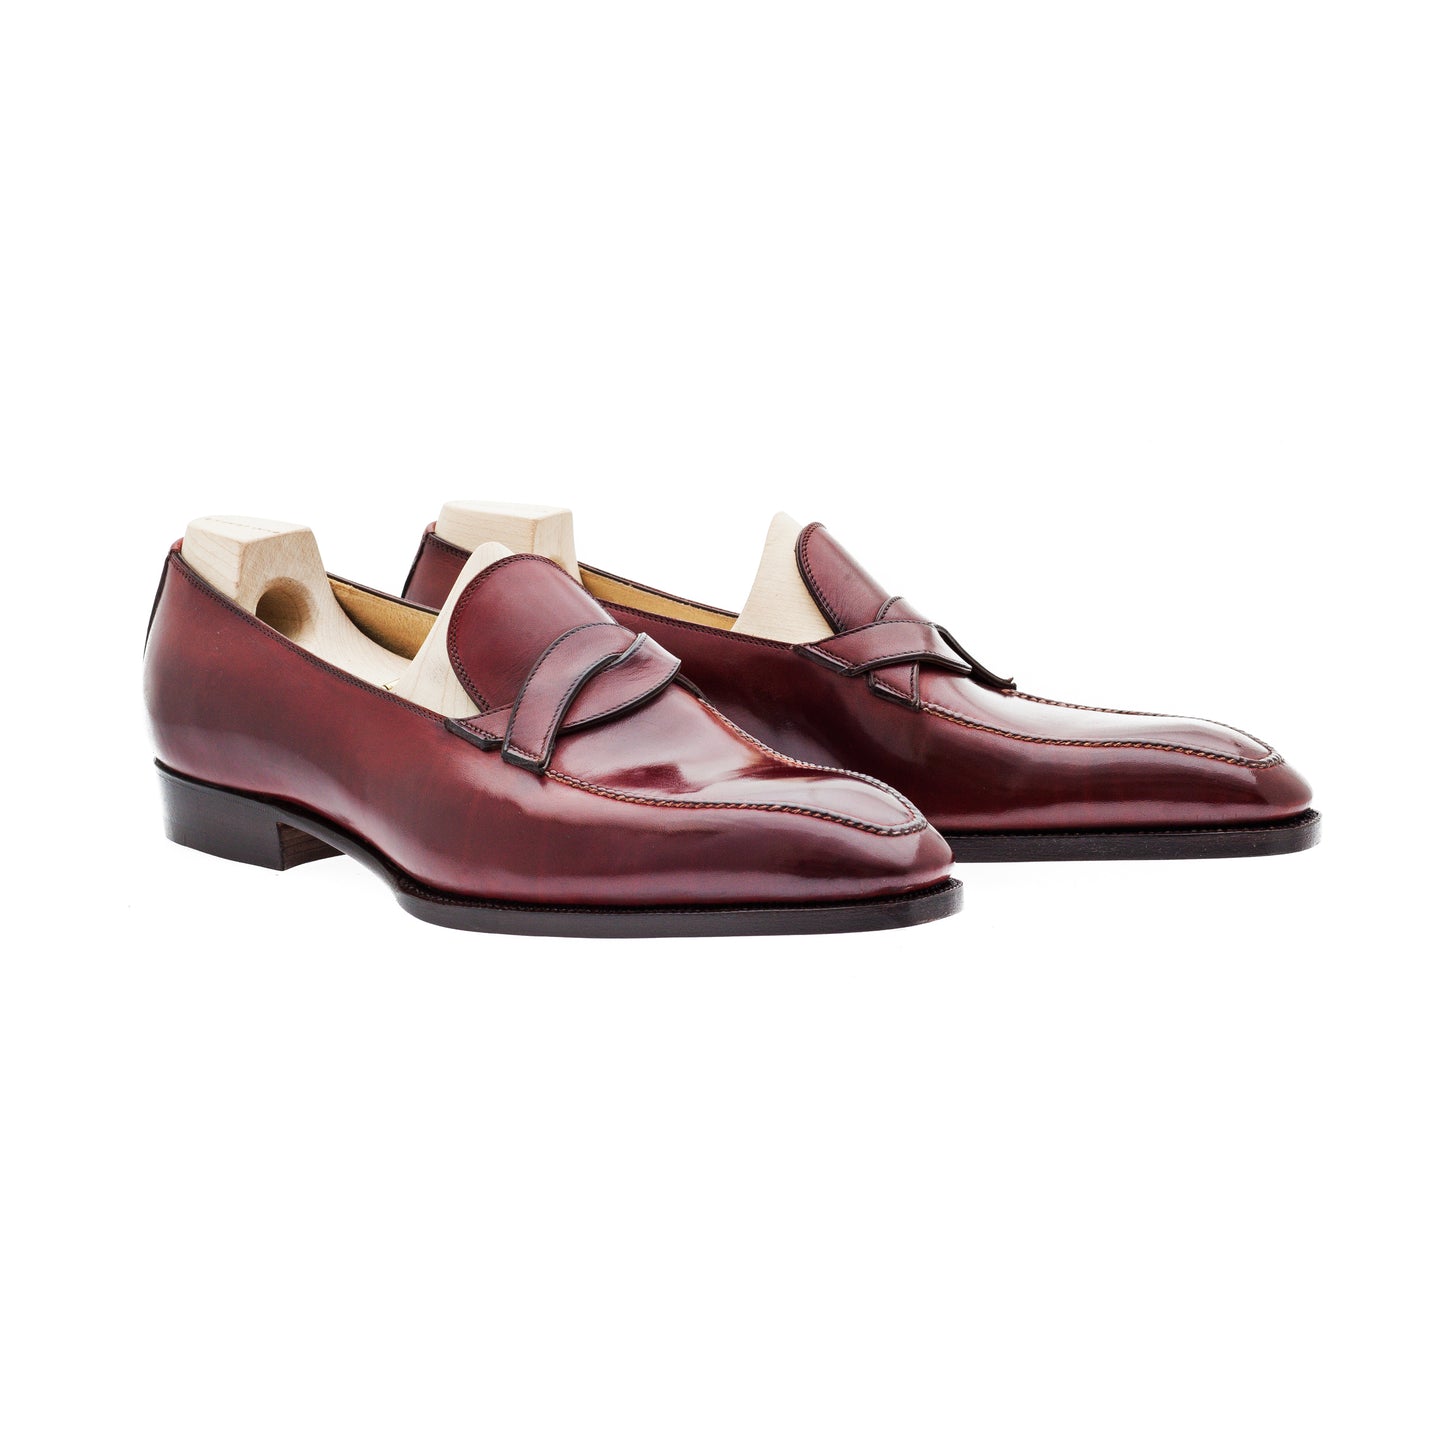 Entwinded loafer in Burgundy Crust calf leather